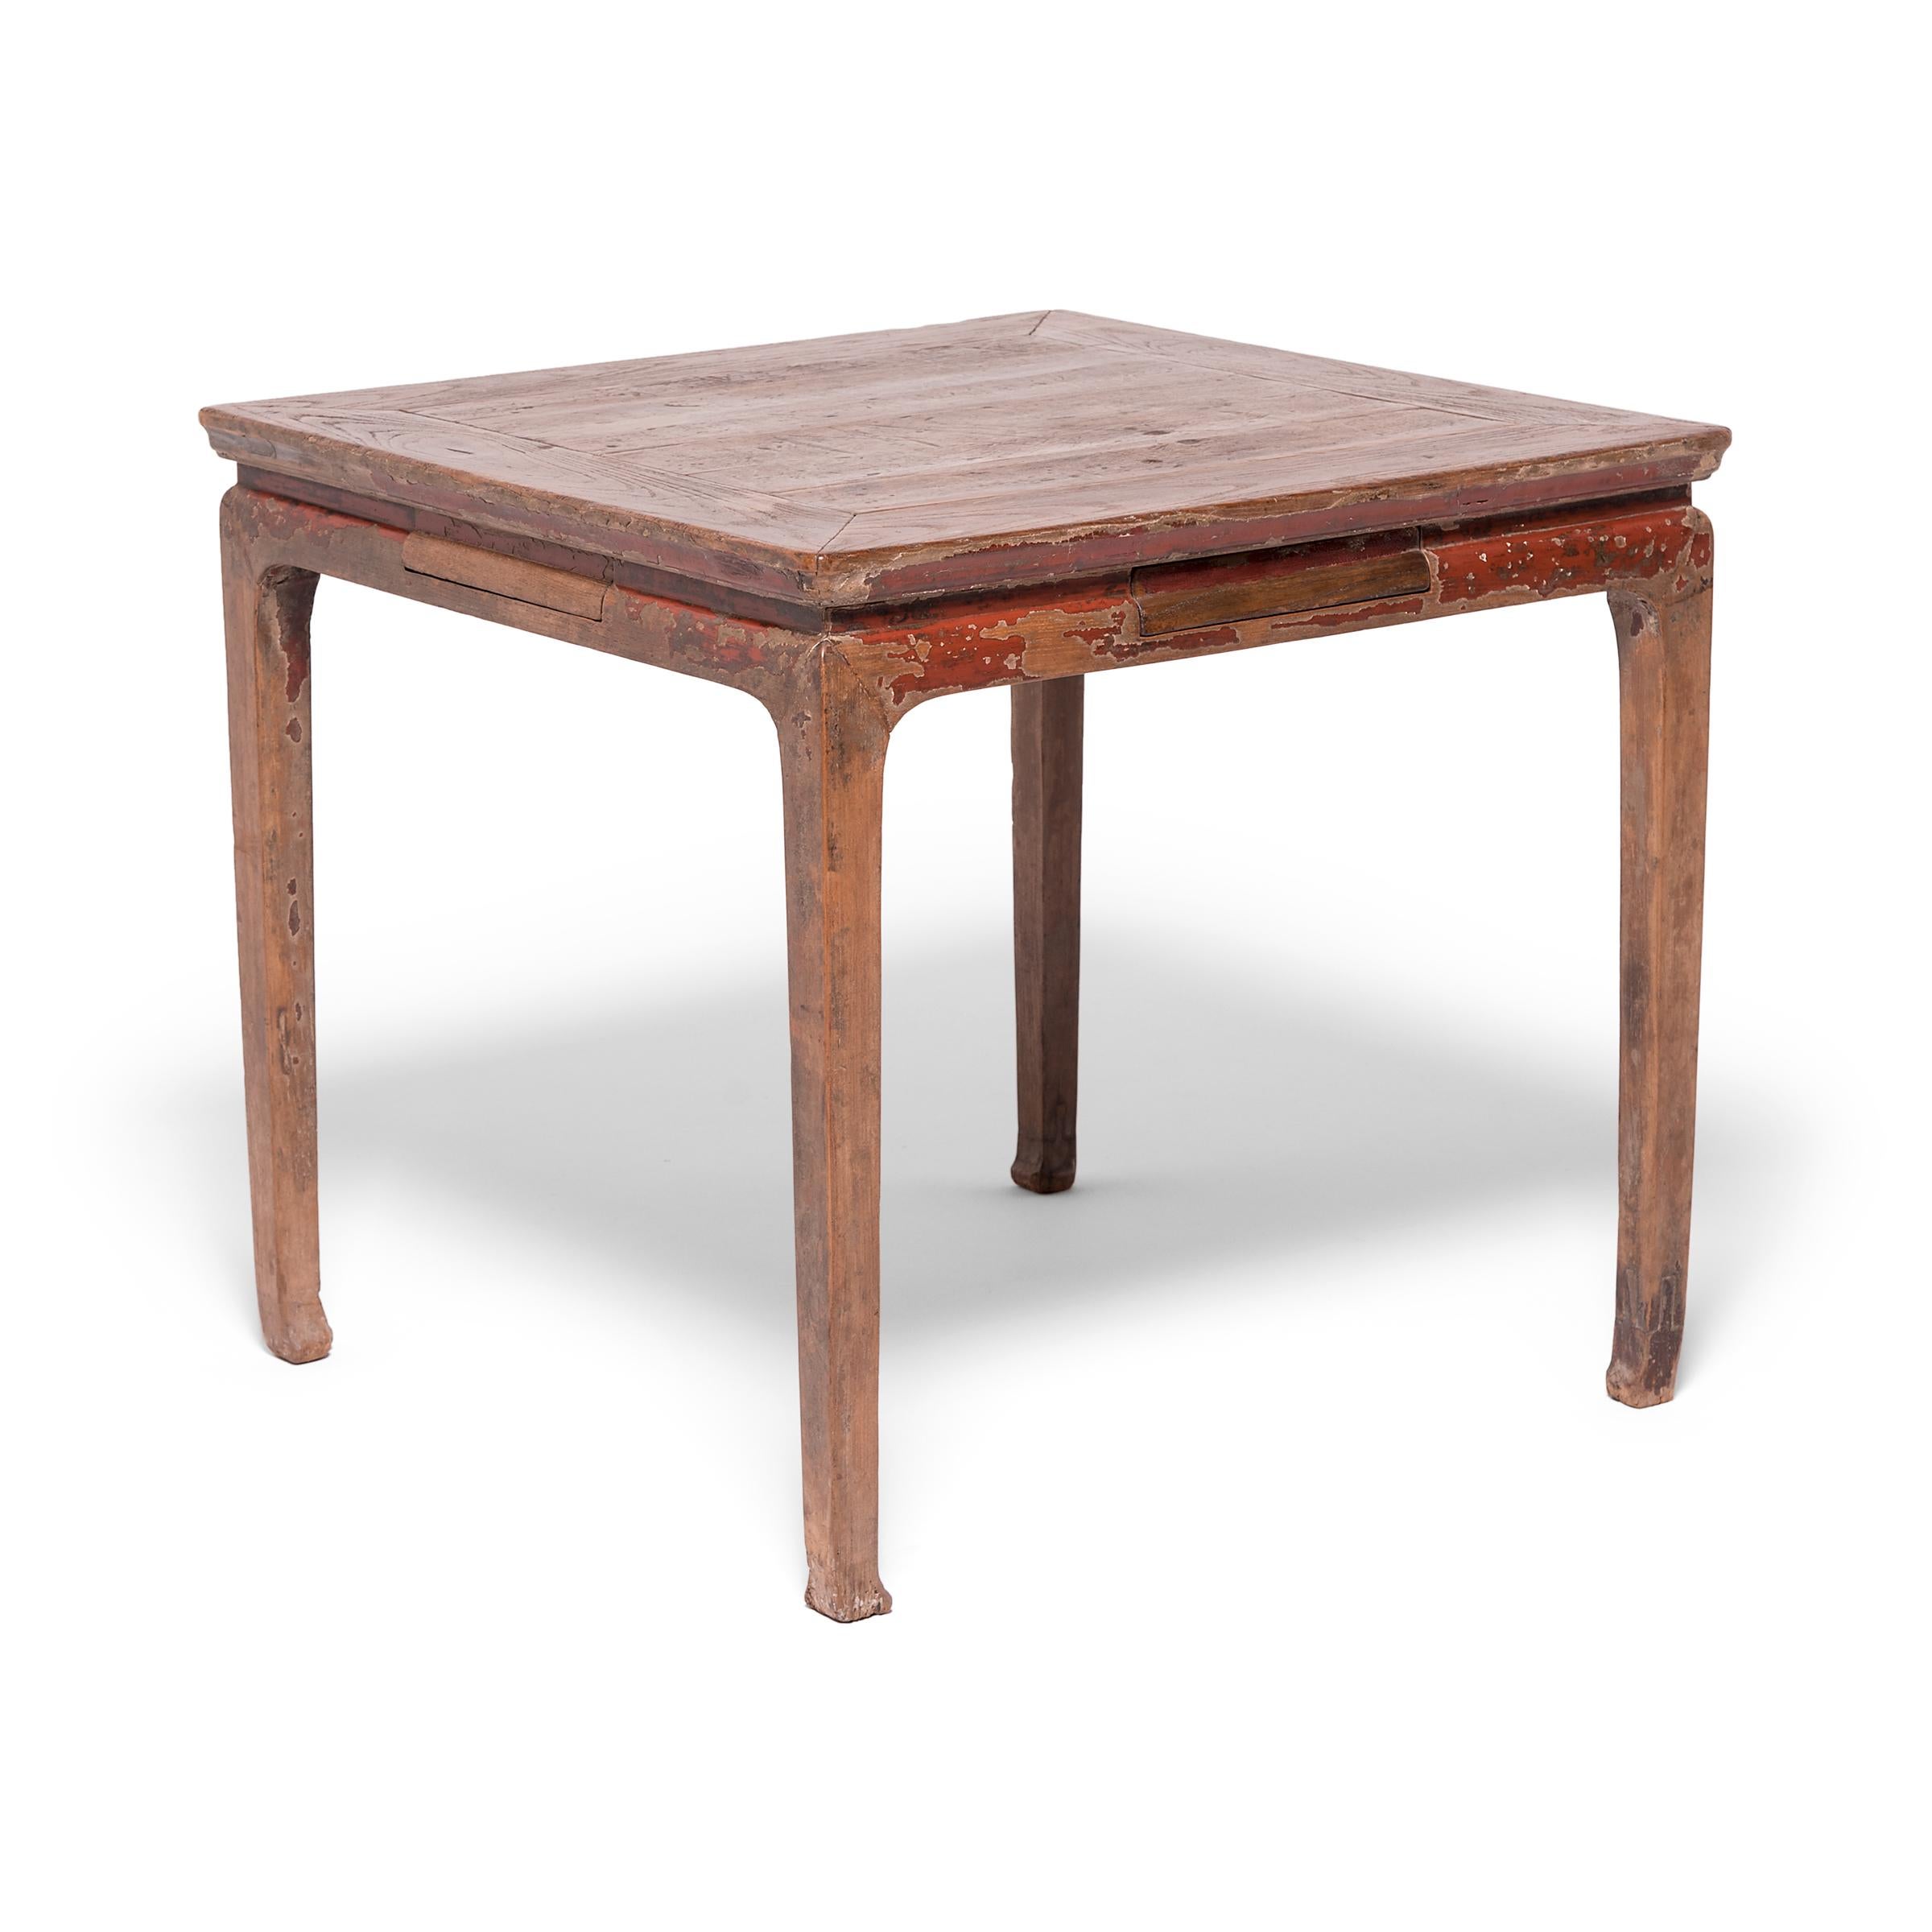 With straight legs and a square profile, this simple game table was once used for round upon round of mahjong, a popular Chinese game invented during the Qing dynasty. Constructed with traditional mortise-and-tenon joinery techniques, the card table